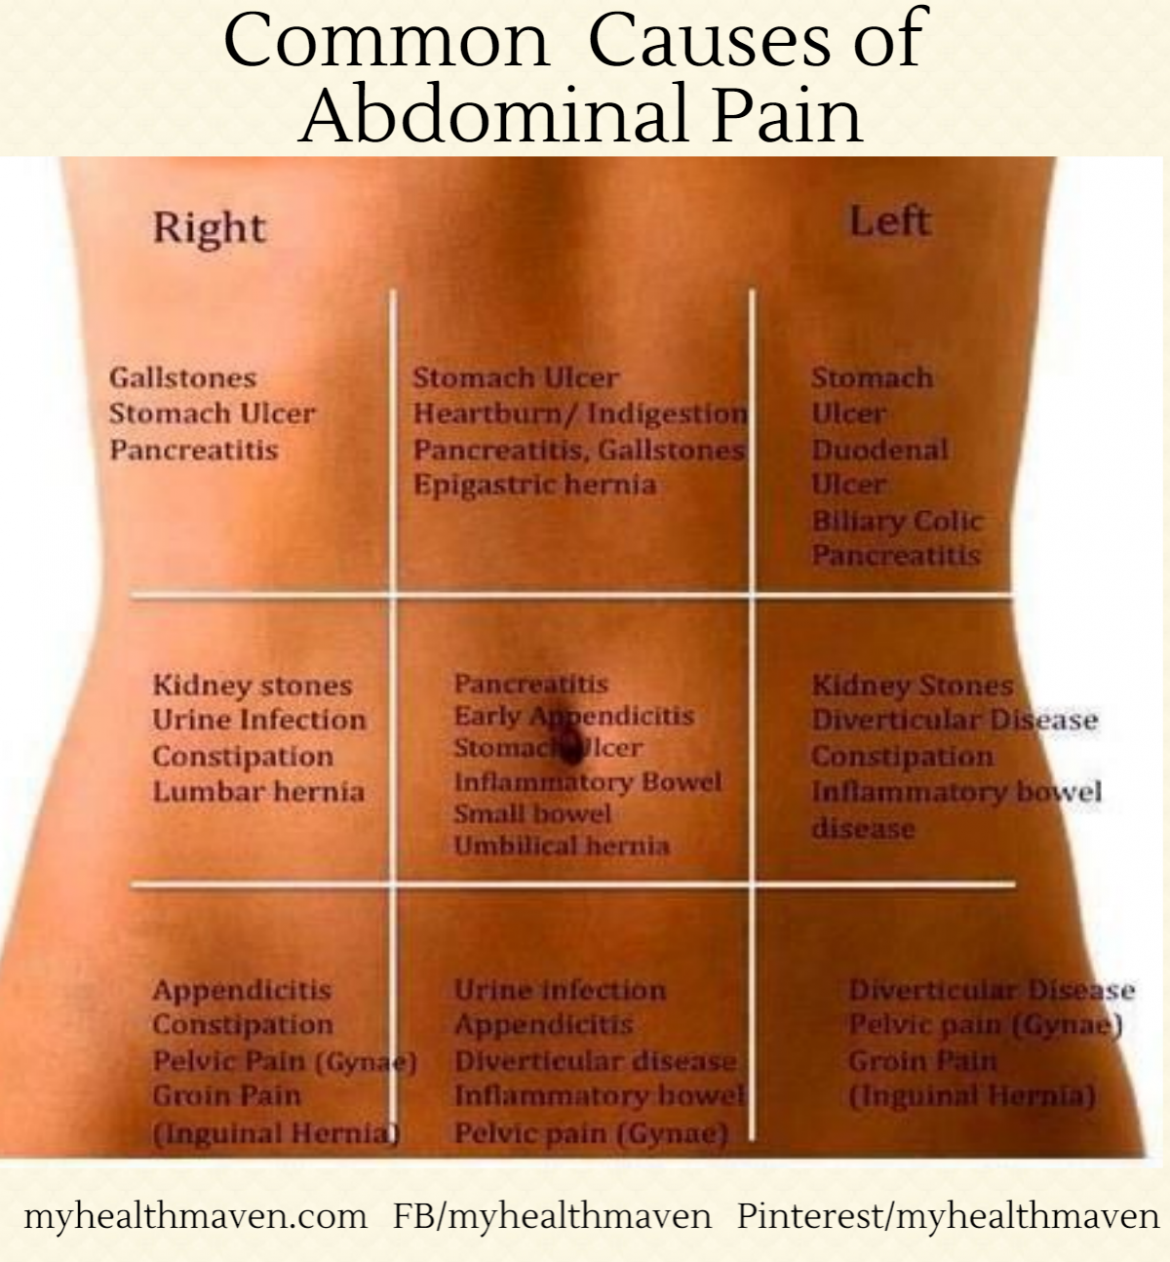 common-causes-of-abdominal-pain - My Health Maven